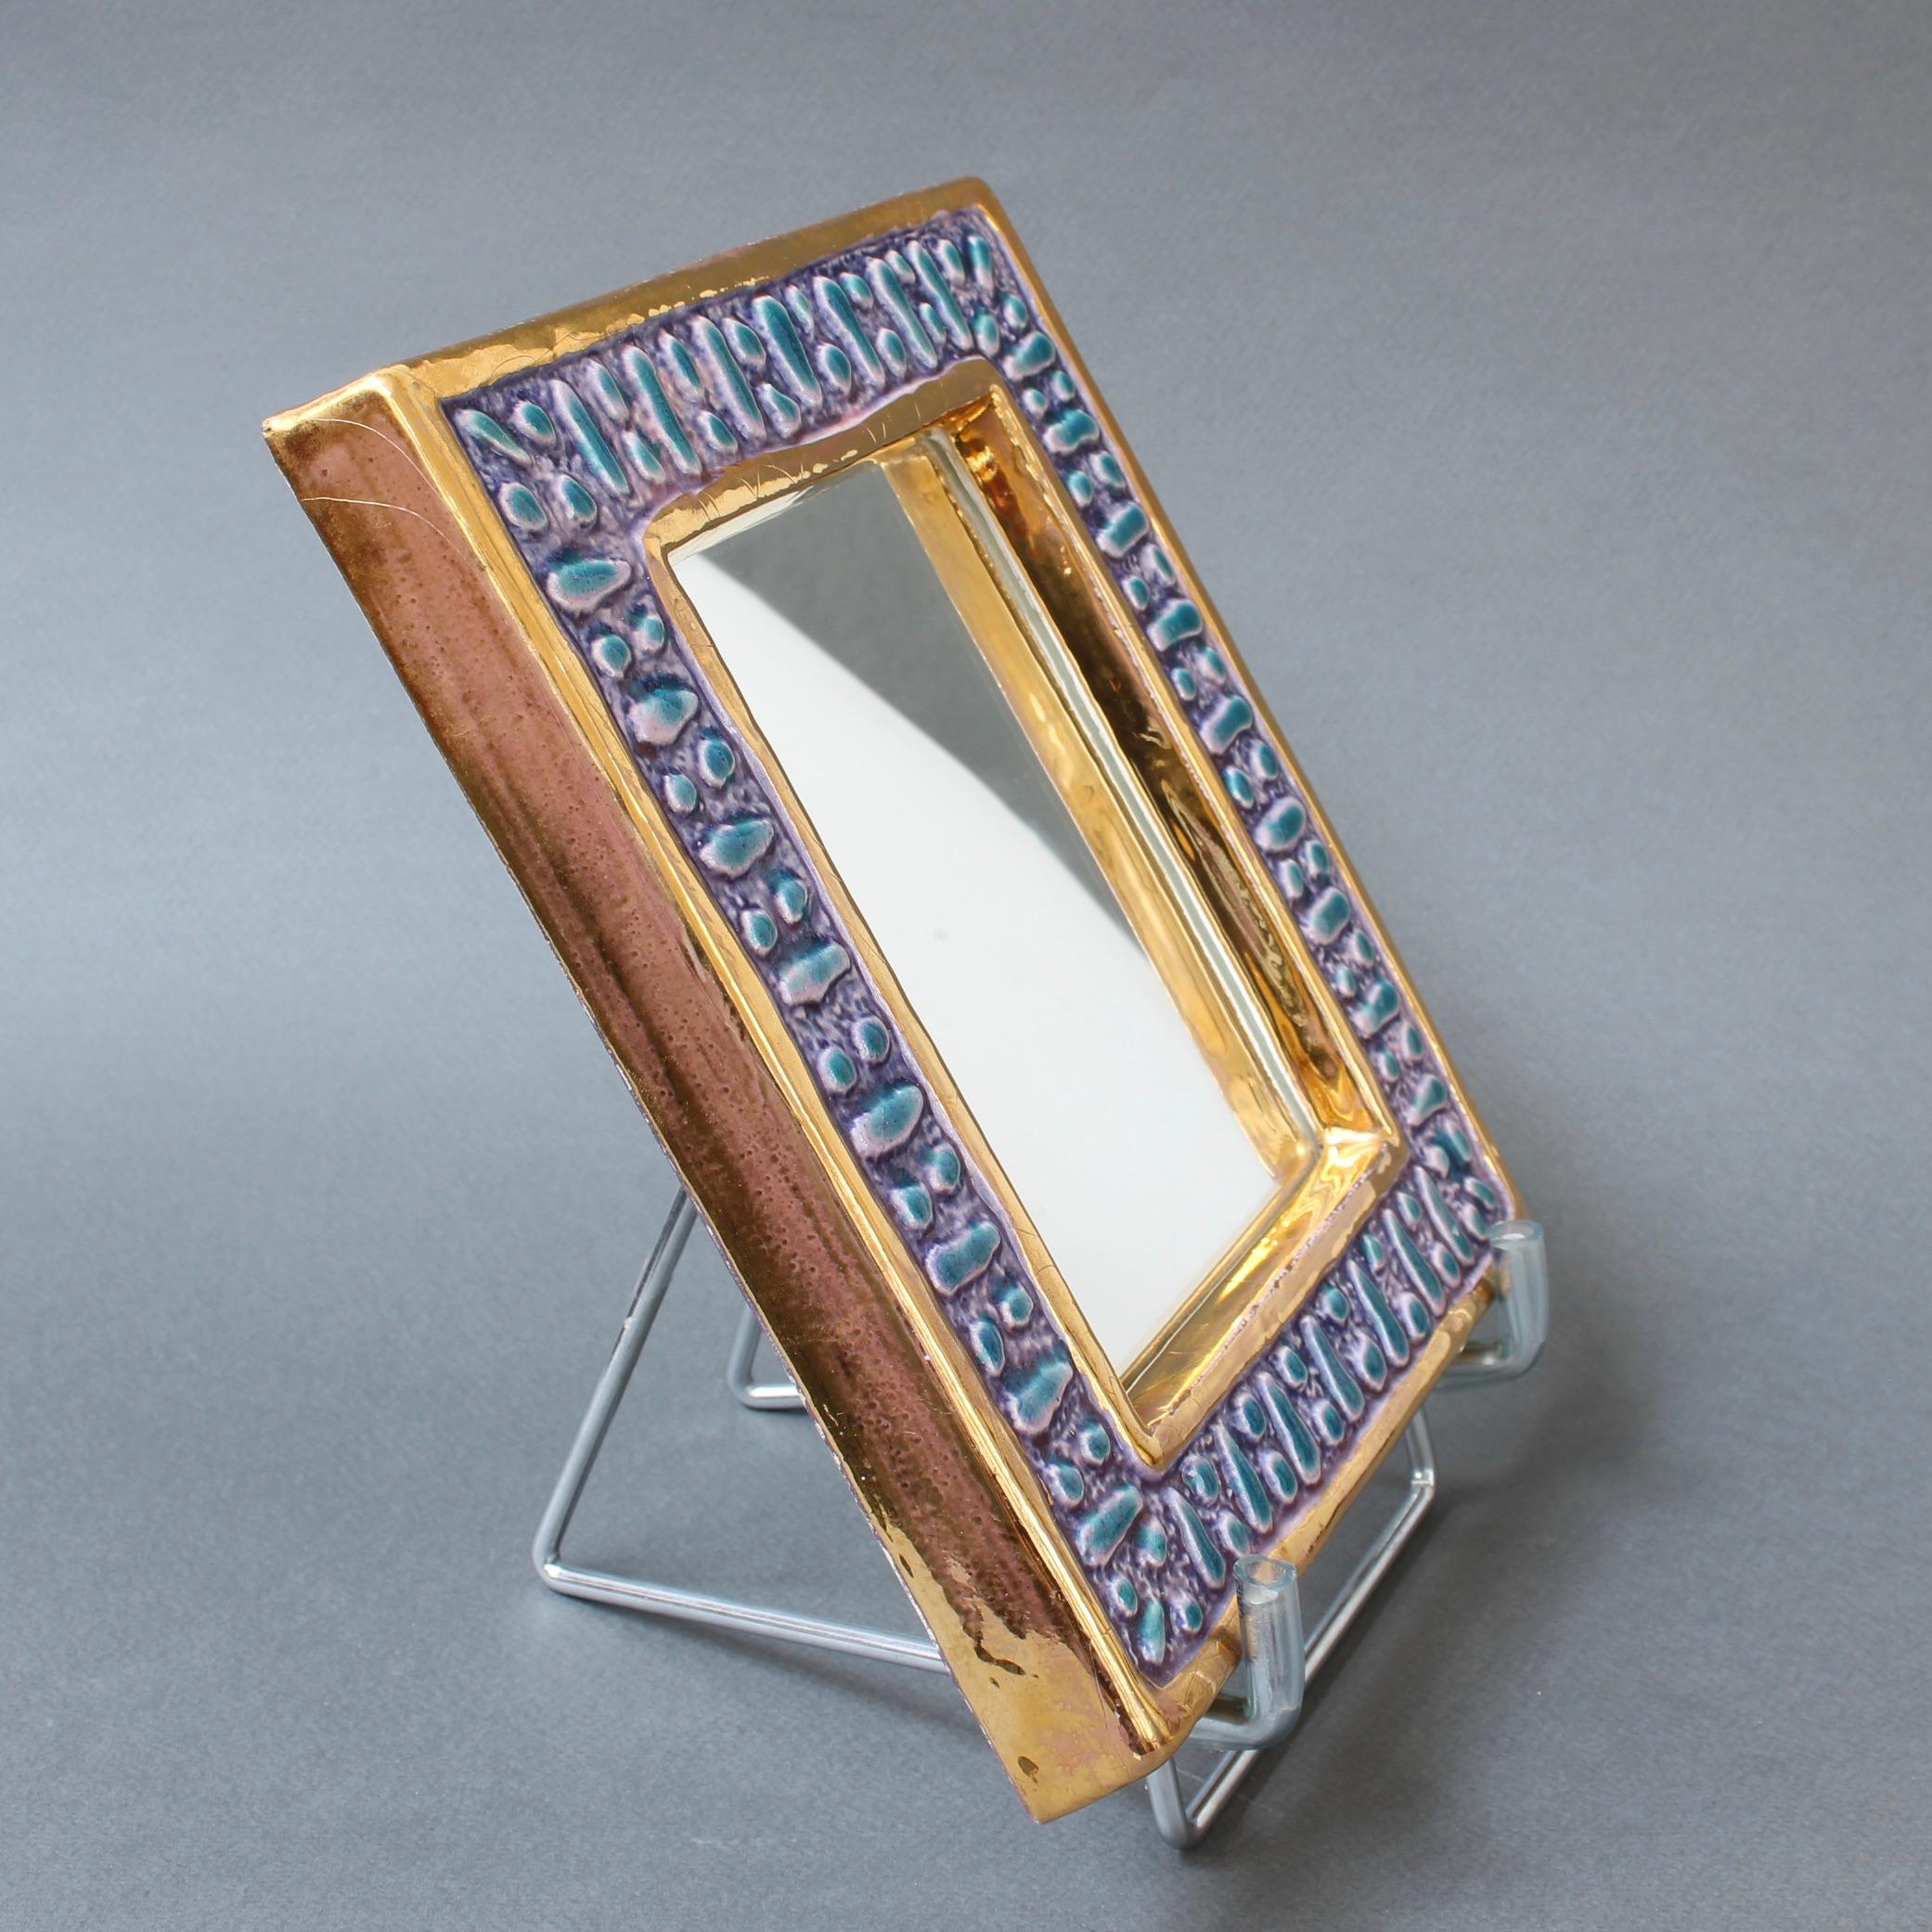 French Ceramic Wall Mirror with Enamel Glaze Attributed to François Lembo, circa 1970s